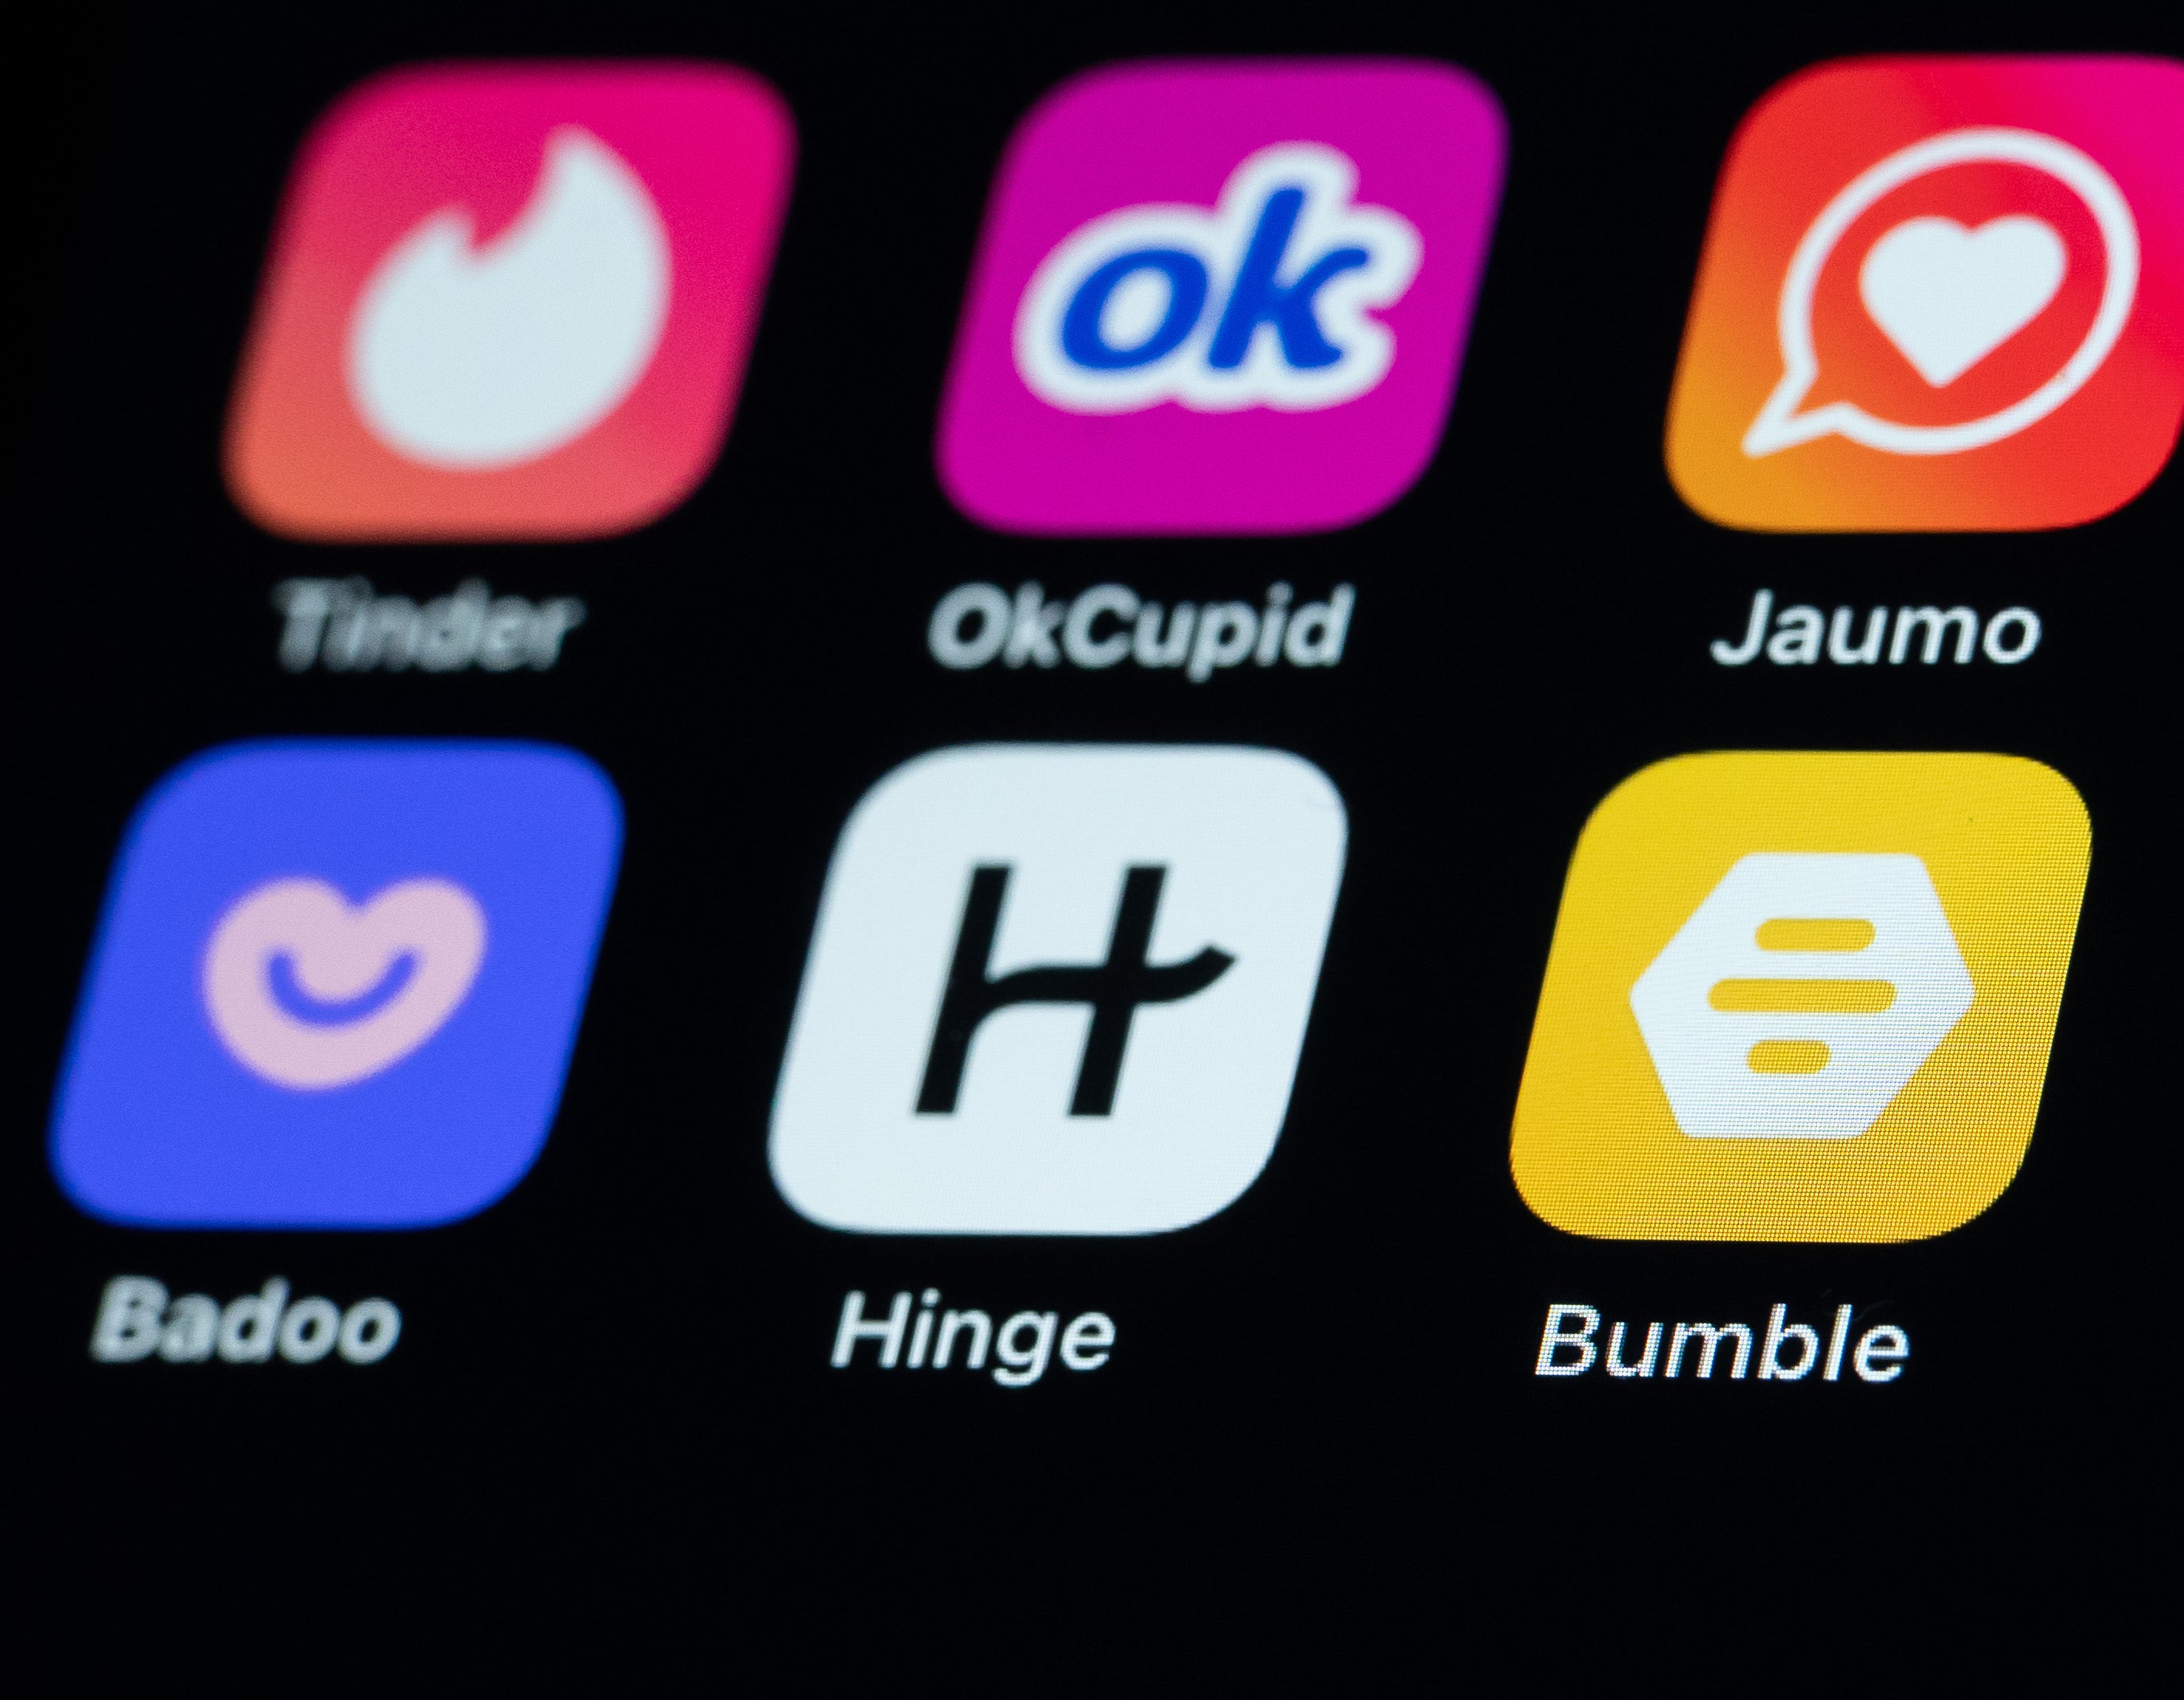 Phone screen displaying numerous dating apps, including Hinge, Bumble, and Tinder